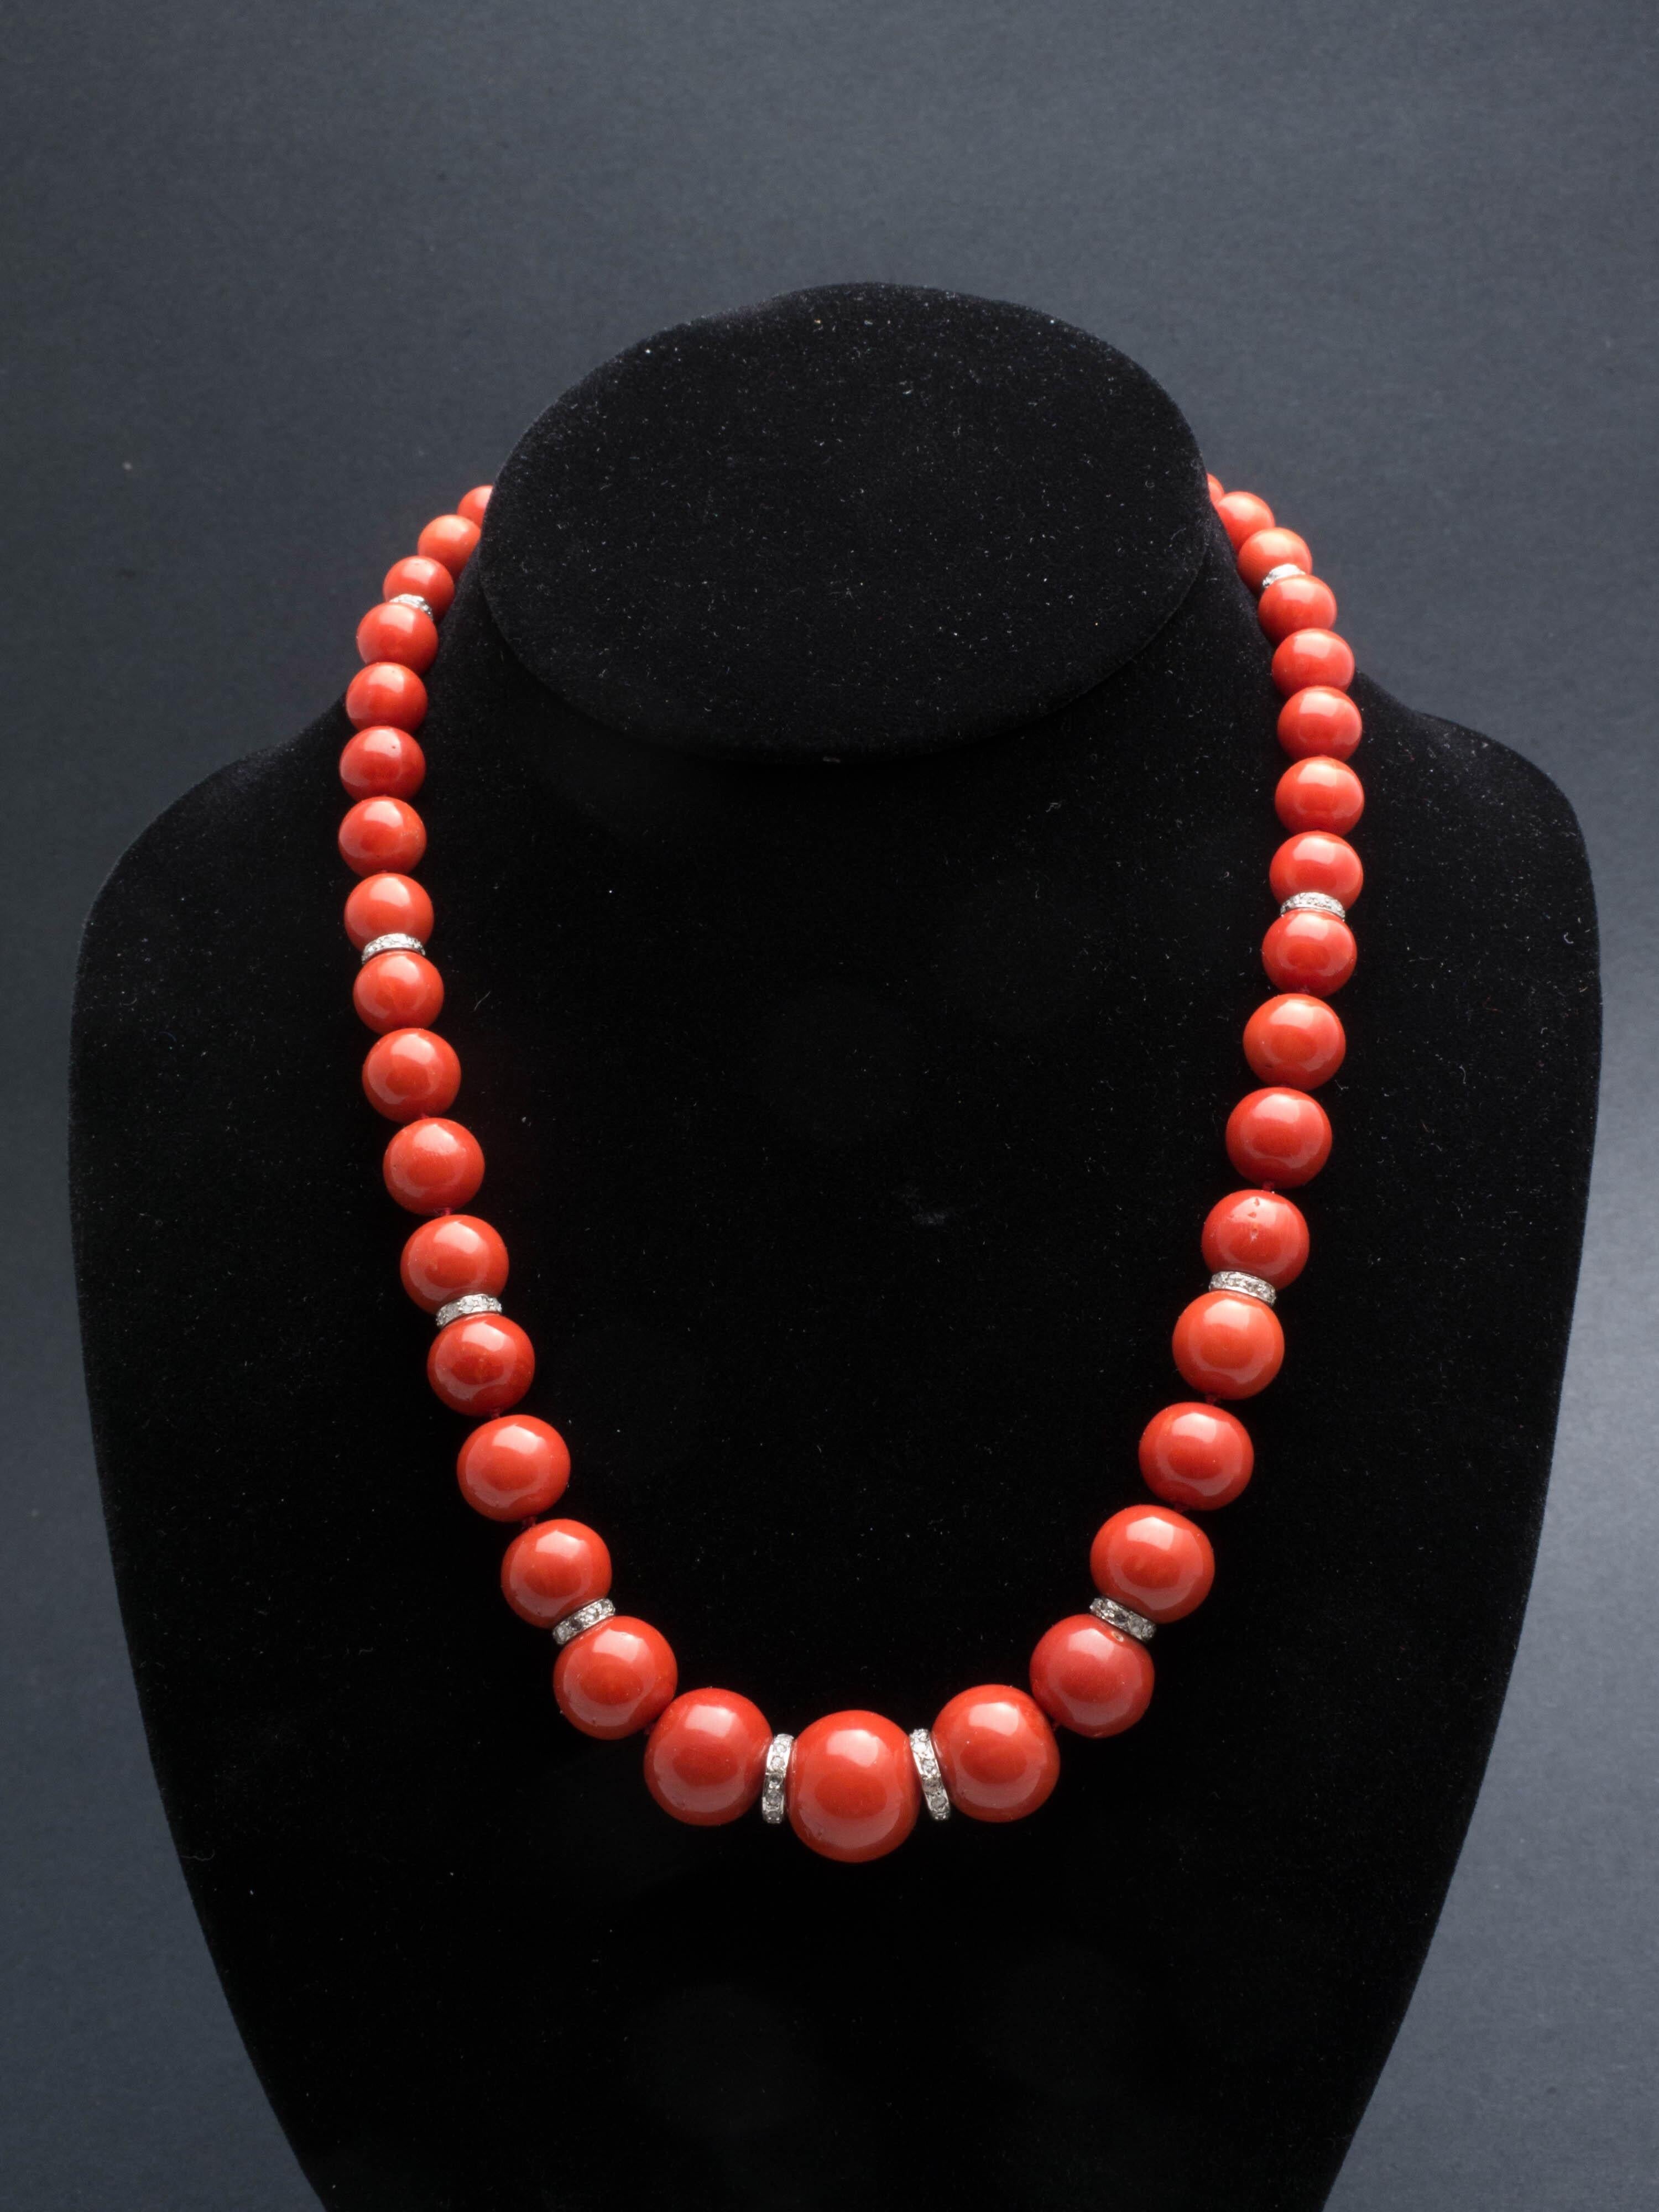 Beautiful natural red coral bead necklace with 12 diamond roundels spacer. Platinum clasp with 5 carved emerald, 1 jadeite and 8 diamonds. Coral beads are ranged from 15.5 mm diameter to 7.35 mm. Total length of necklace is 18.75 inches. Total